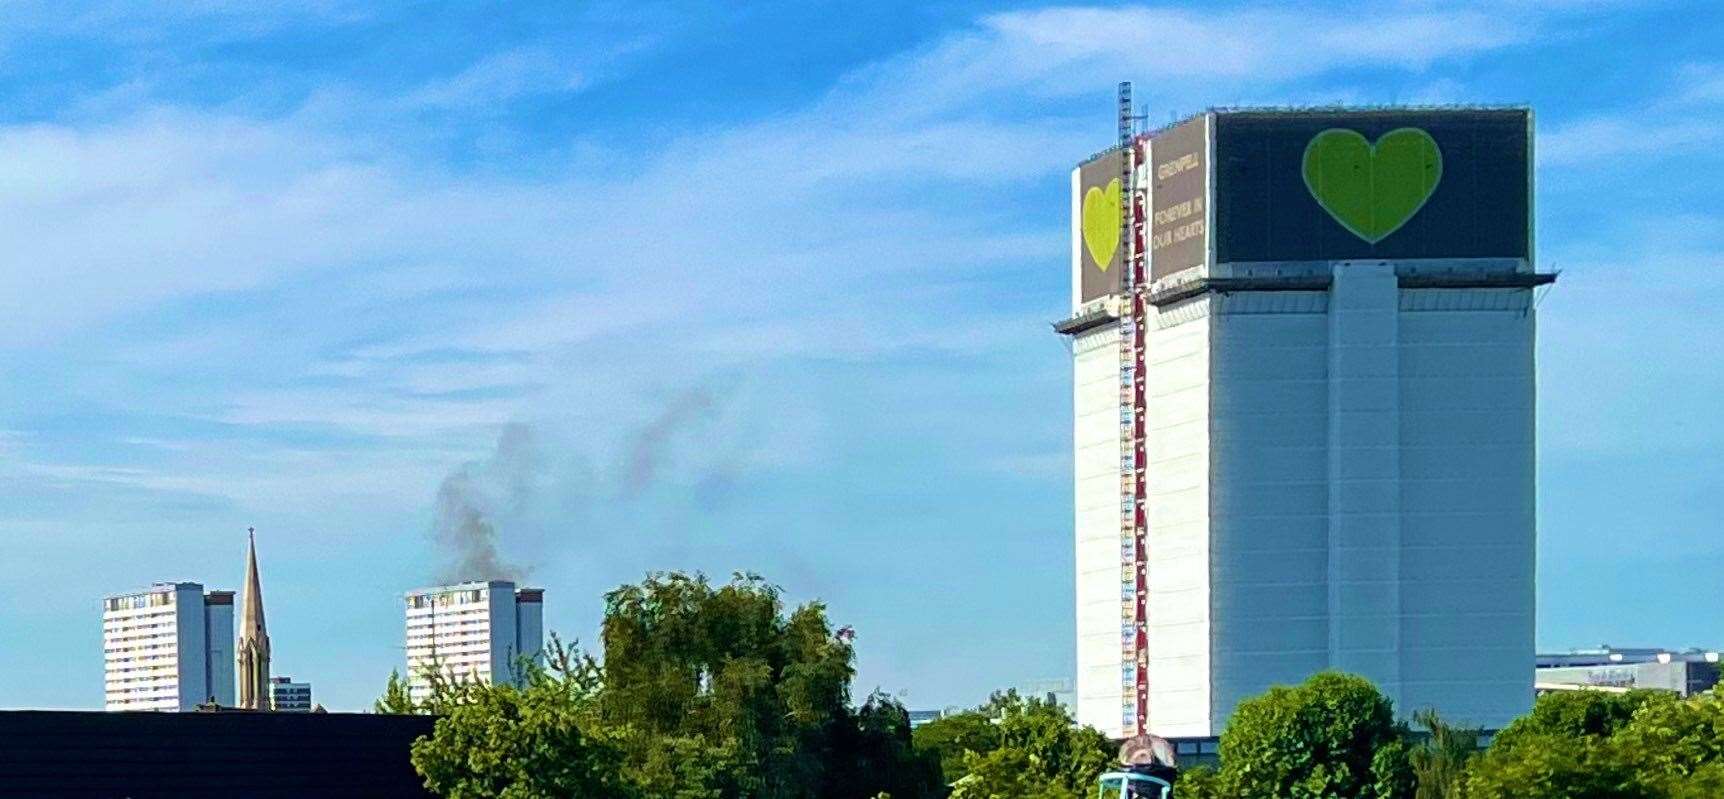 The fire could be seen in the high-rise near Grenfell Tower (fabtic_ltd/PA)